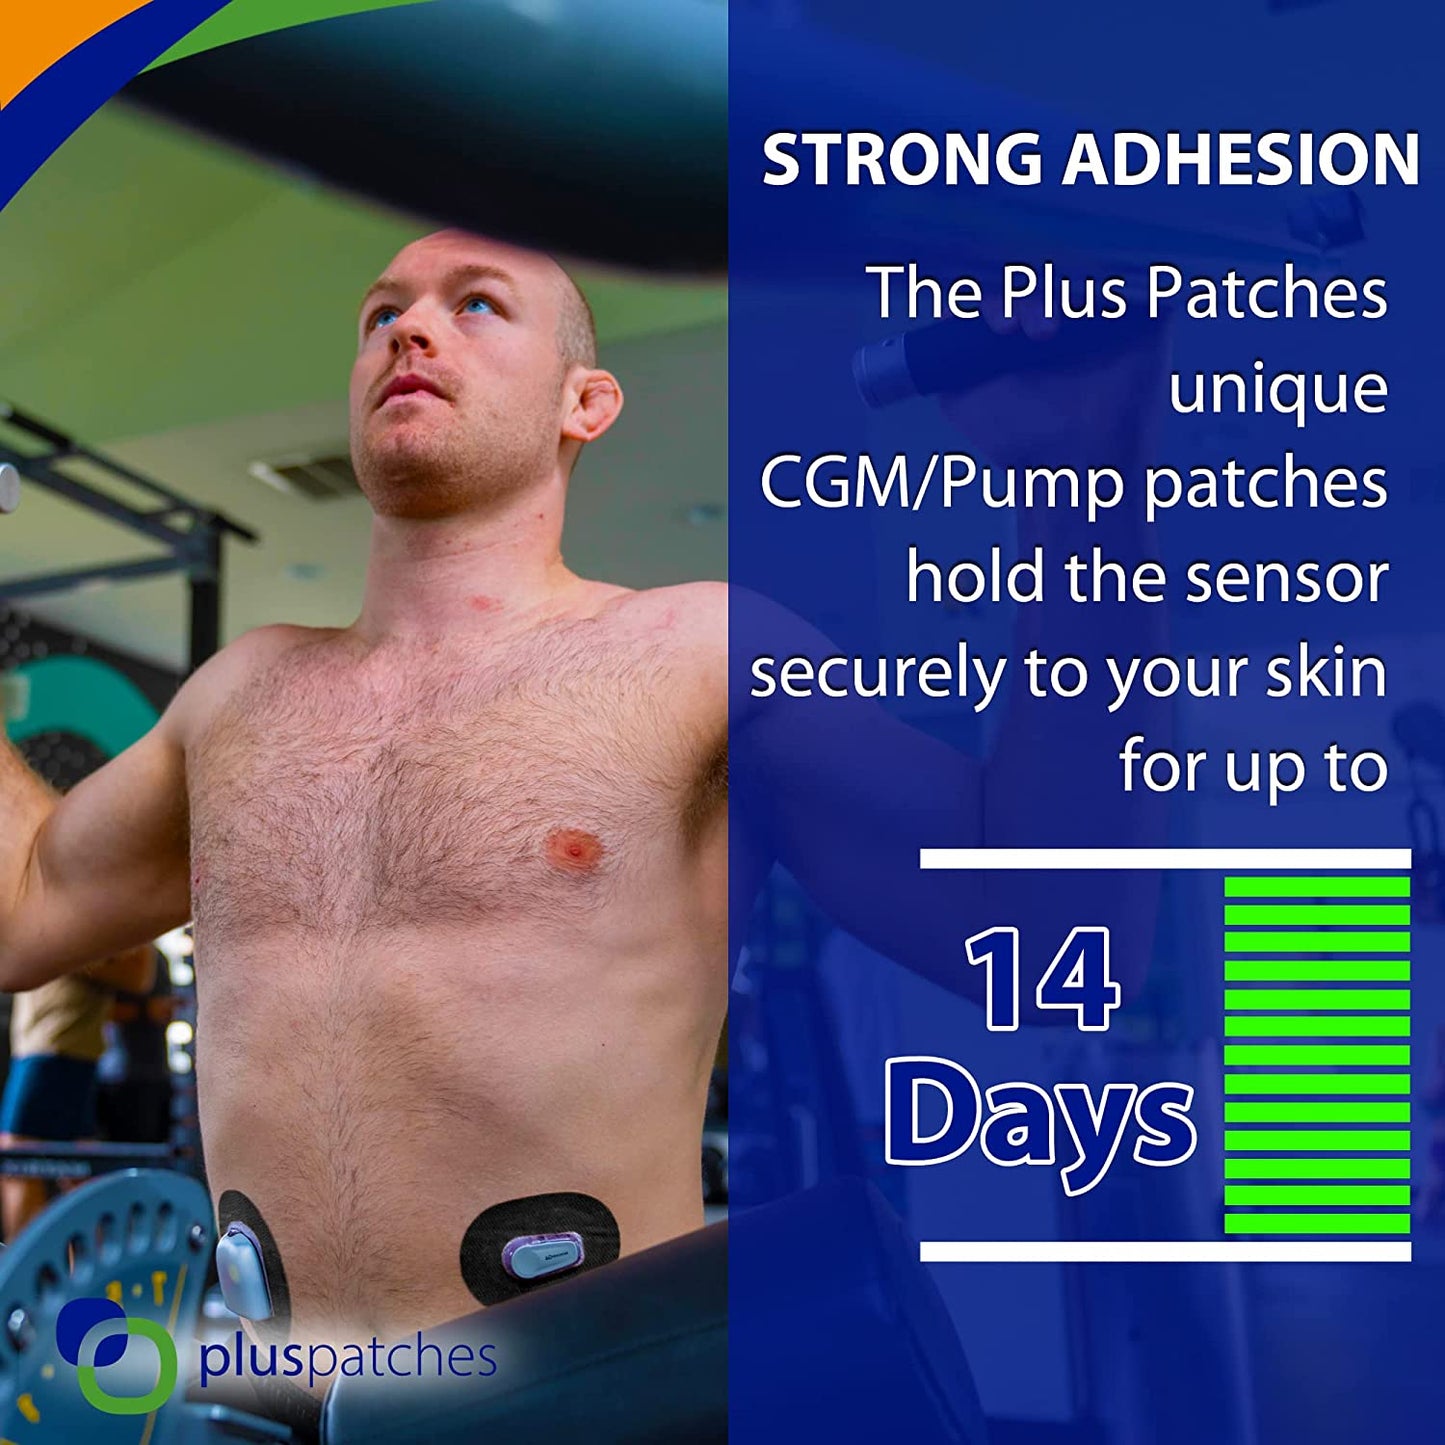 Plus Patches CGM Overlay / Cover Tape have 10-14 days holding power on your skin. The materials on the Plus Patches are designed for maximum wear time, with NO FRAYING or edge lift! The Polyurethane non-woven backing moves with your body (all around stretch) for ultimate comfort over the life of your overlay/ cover tape patch.